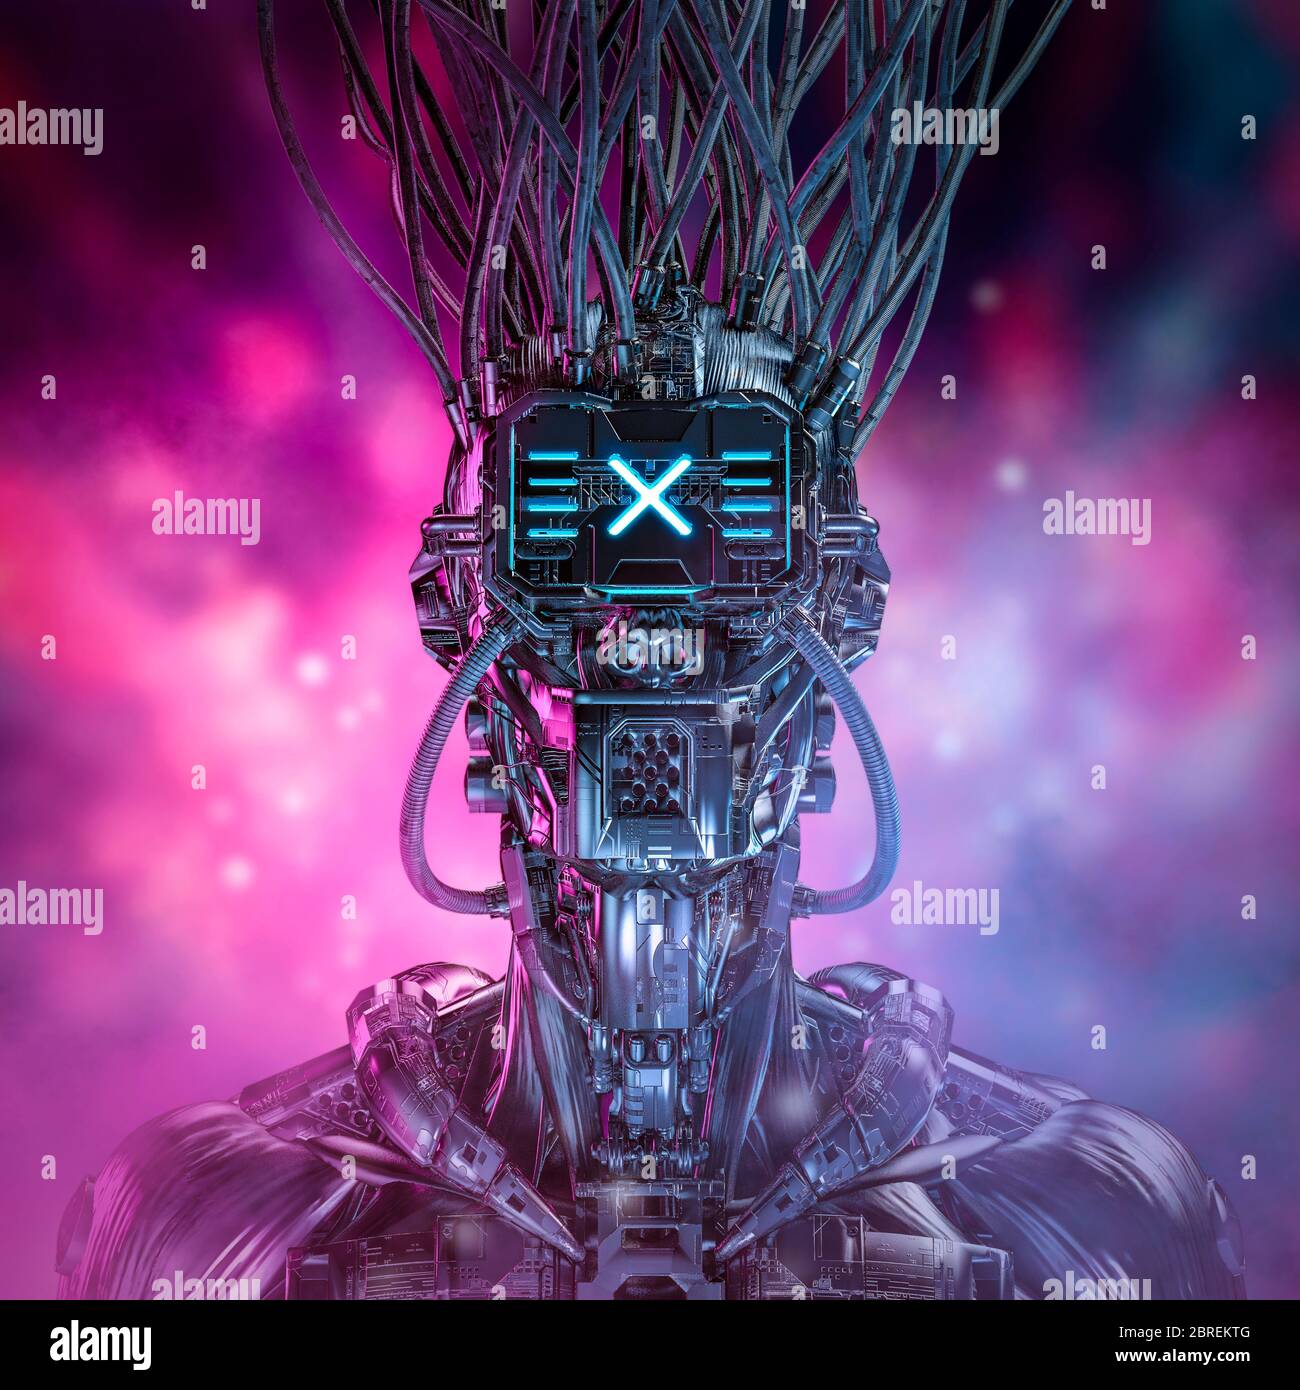 Cyberpunk gamer portrait / 3D illustration of science fiction futuristic  robot character with glowing bokeh background Stock Photo - Alamy